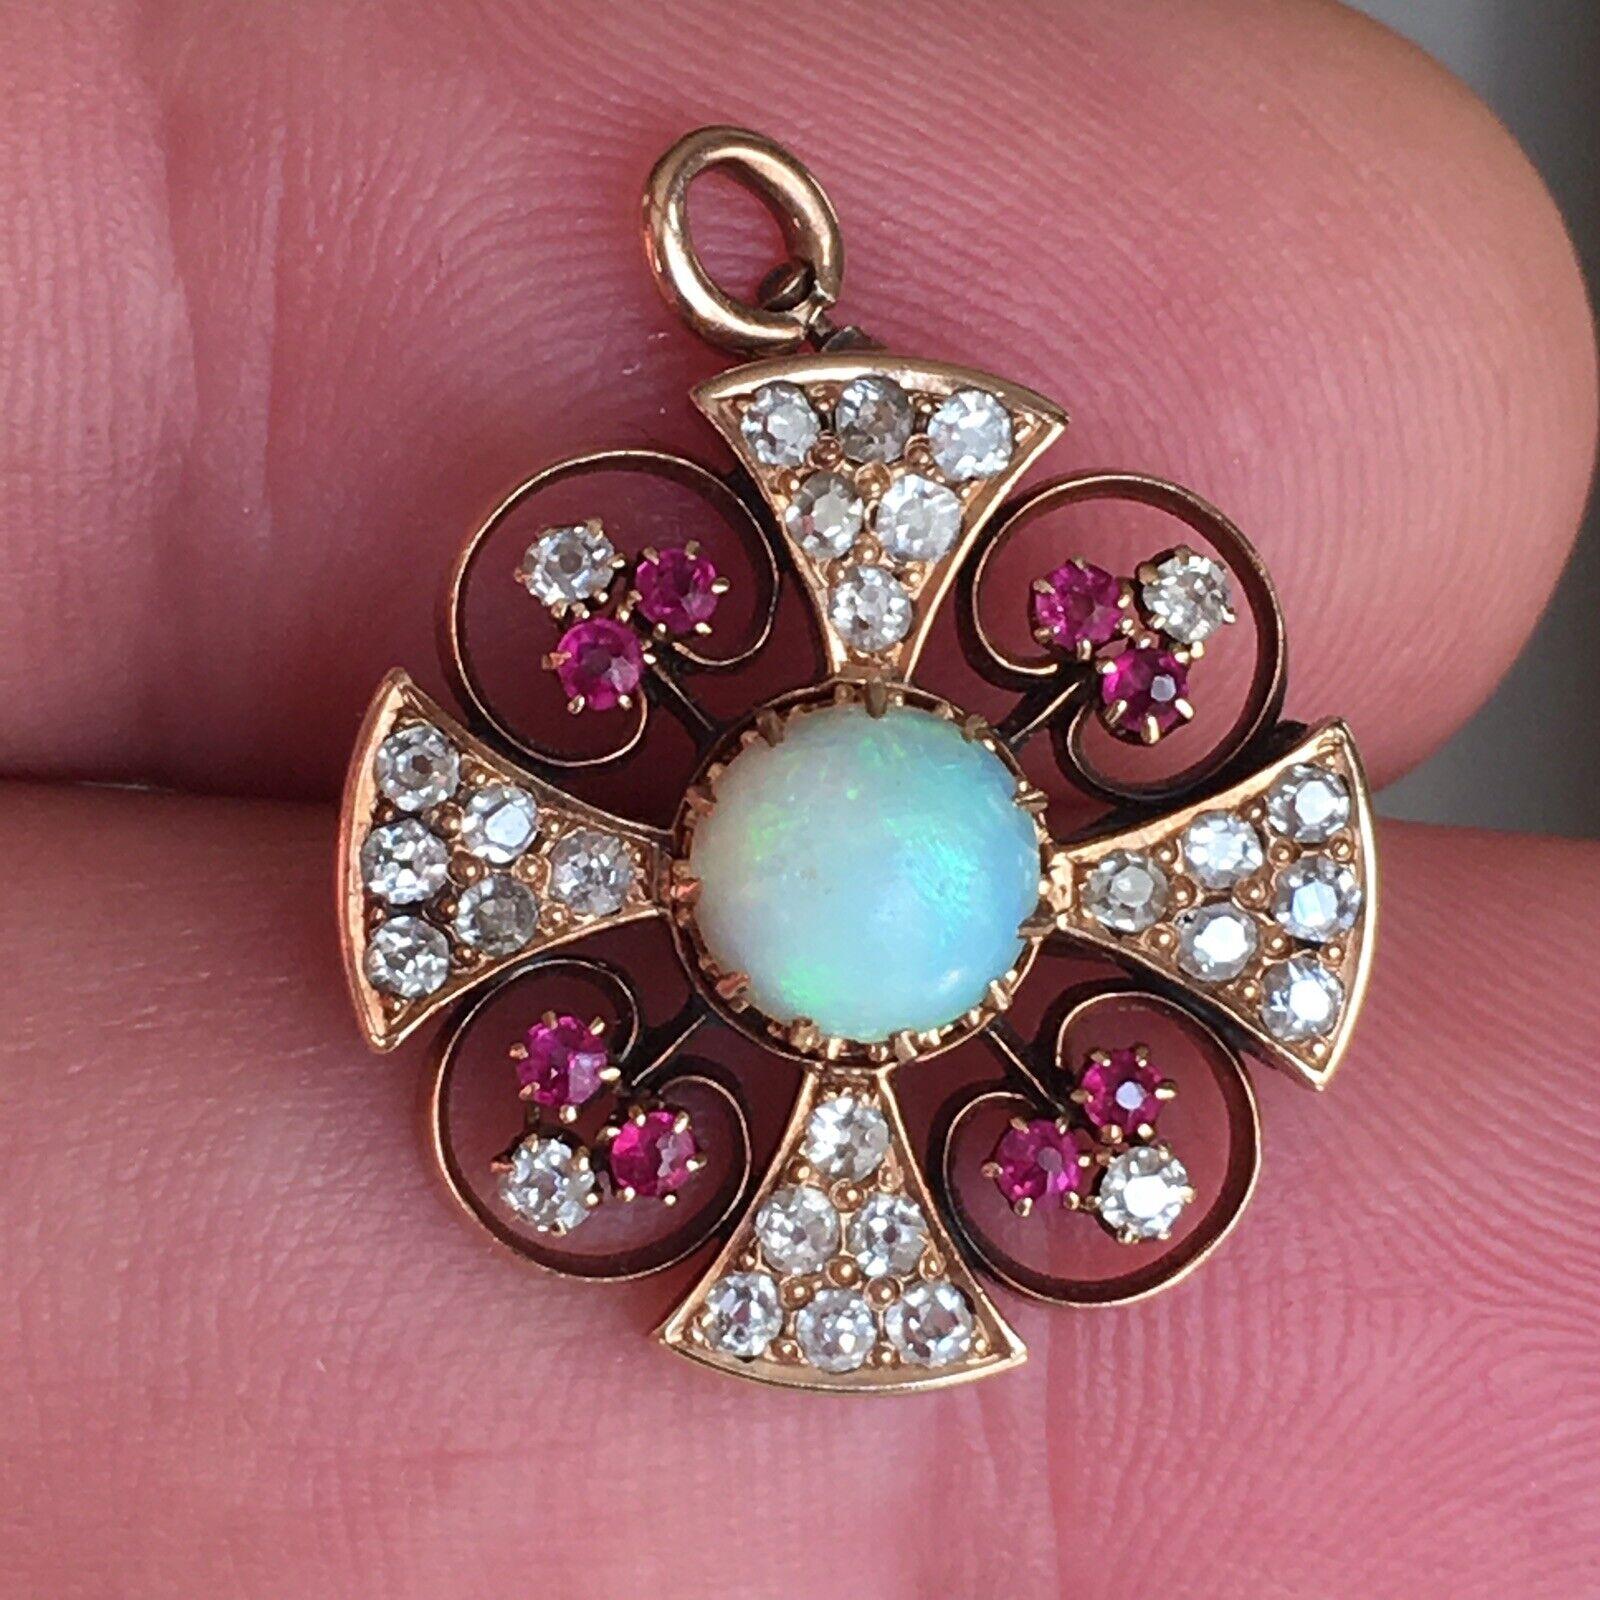 Victorian Rose Gold Diamond Opal Ruby Pendant-Brooch 1890s American In Good Condition For Sale In Santa Monica, CA